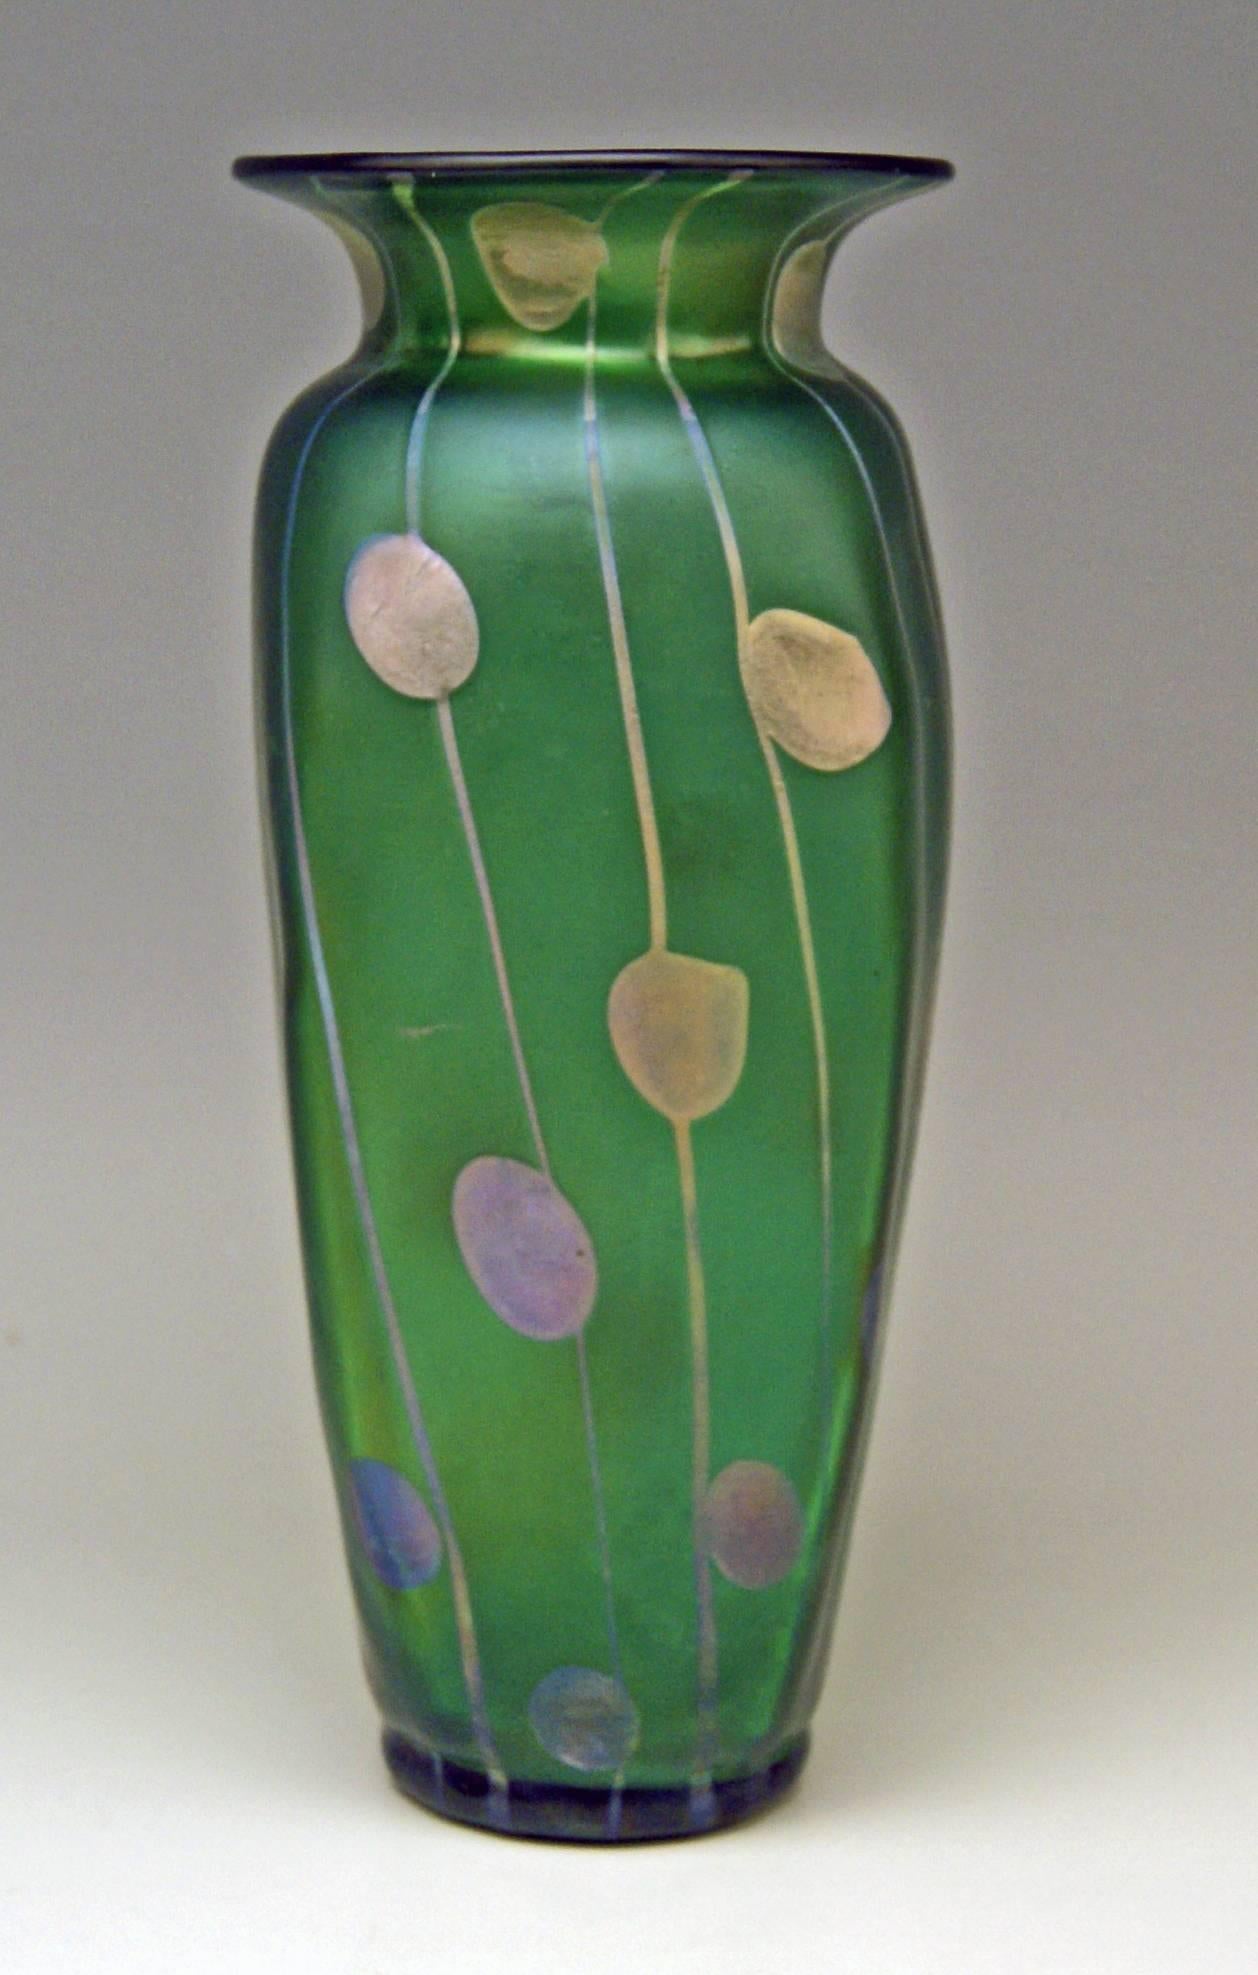 Art Nouveau Loetz Vase (moss green shaded)
Made by Loetz, Klostermuehle   (Klostermühle / Bohemia, Old Imperial Austria).
Manufactured circa  1900.
Decor:  So-said STREIFEN UND FLECKEN  (= SPOTS AND STRIPES) laid on moss-green glass:  This is a